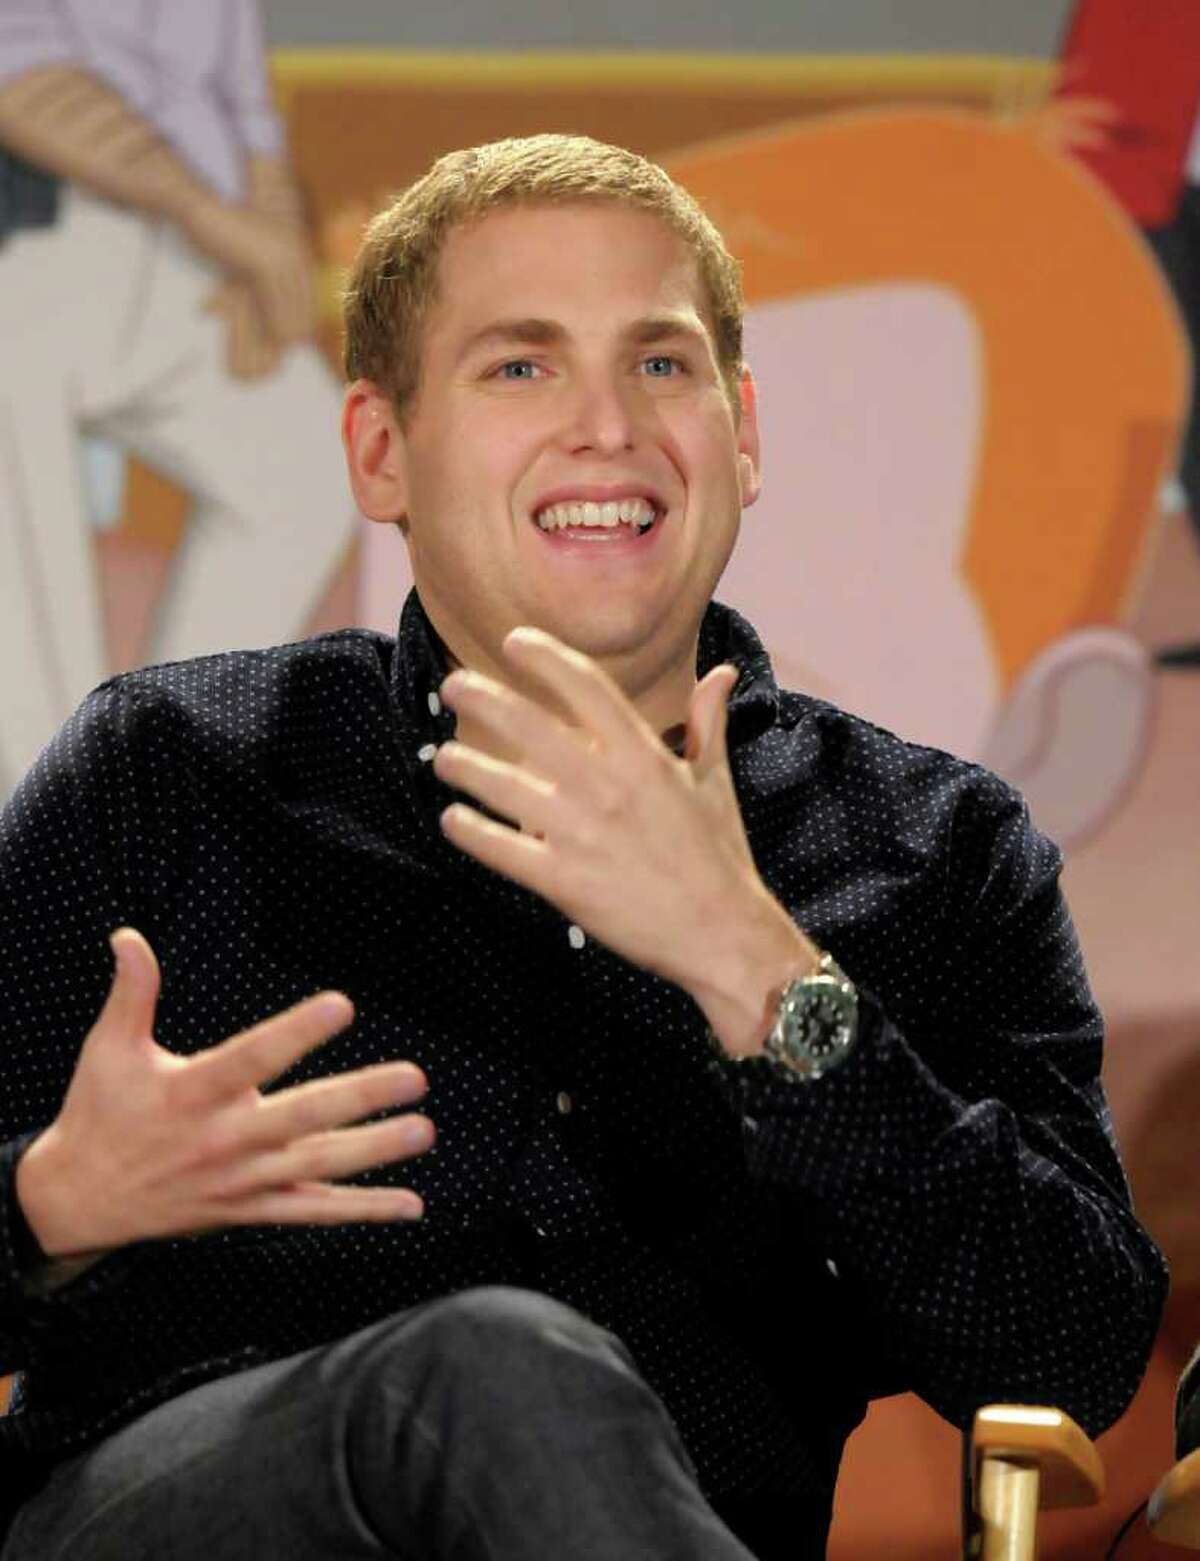 Actor Jonah Hill speaks during a panel at the The Television Critics Association 2011 Summer Press Tour in Beverly Hills, Calif. on Friday, Aug. 5, 2011. Hill the creator of and a voice actor in the new animated television series "Allen Gregory" on FOX.